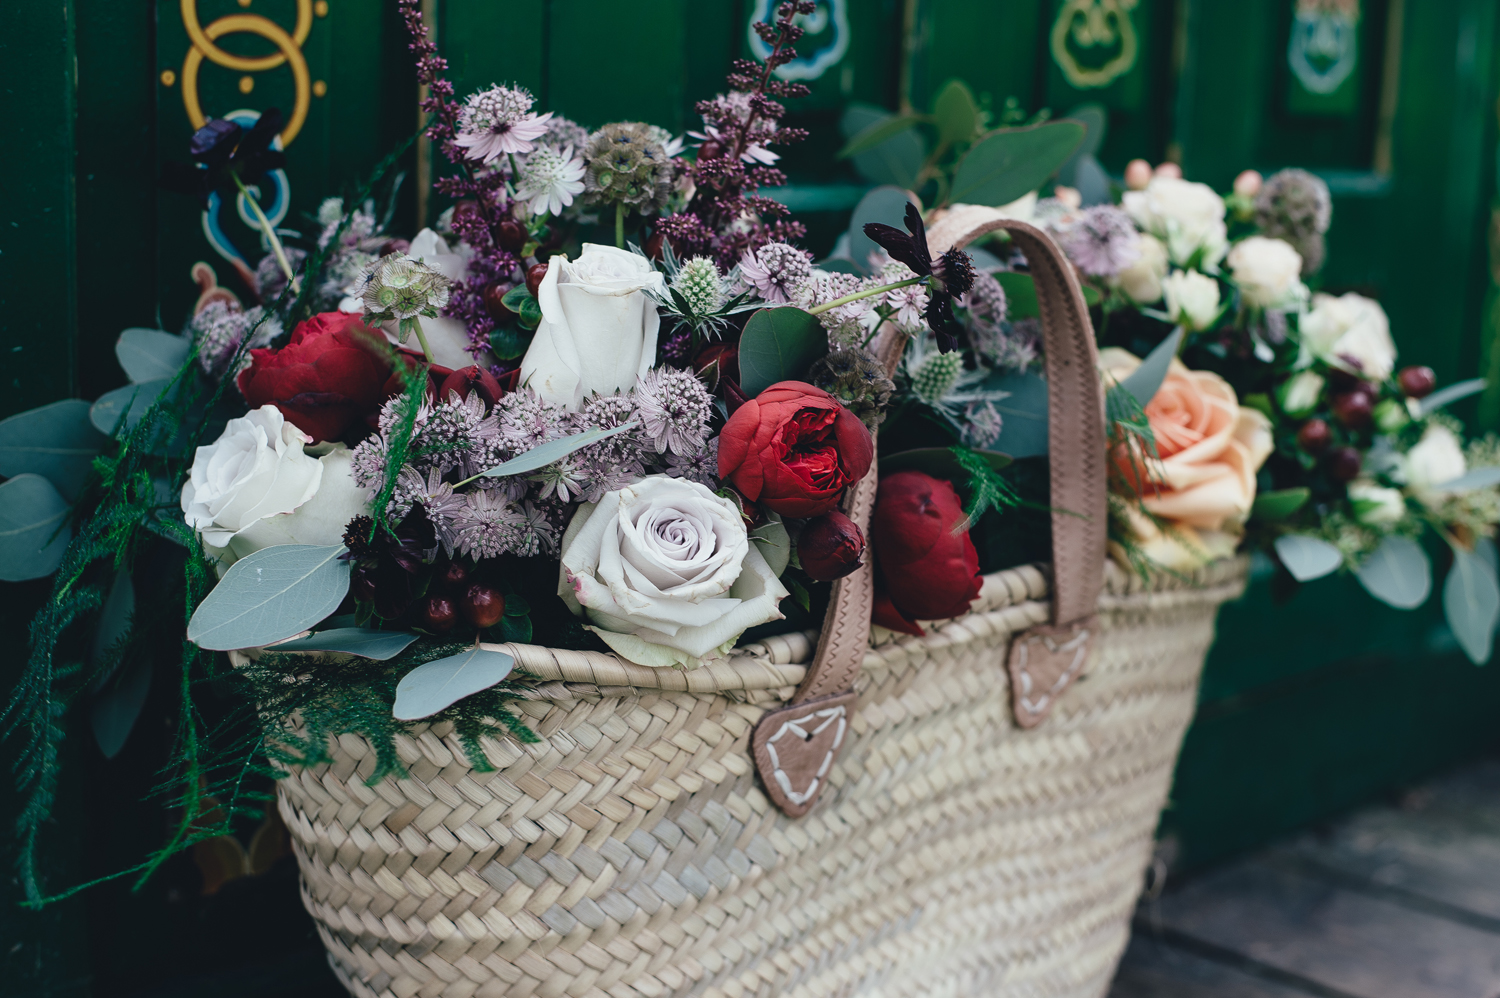 A Basket Full of Blooms